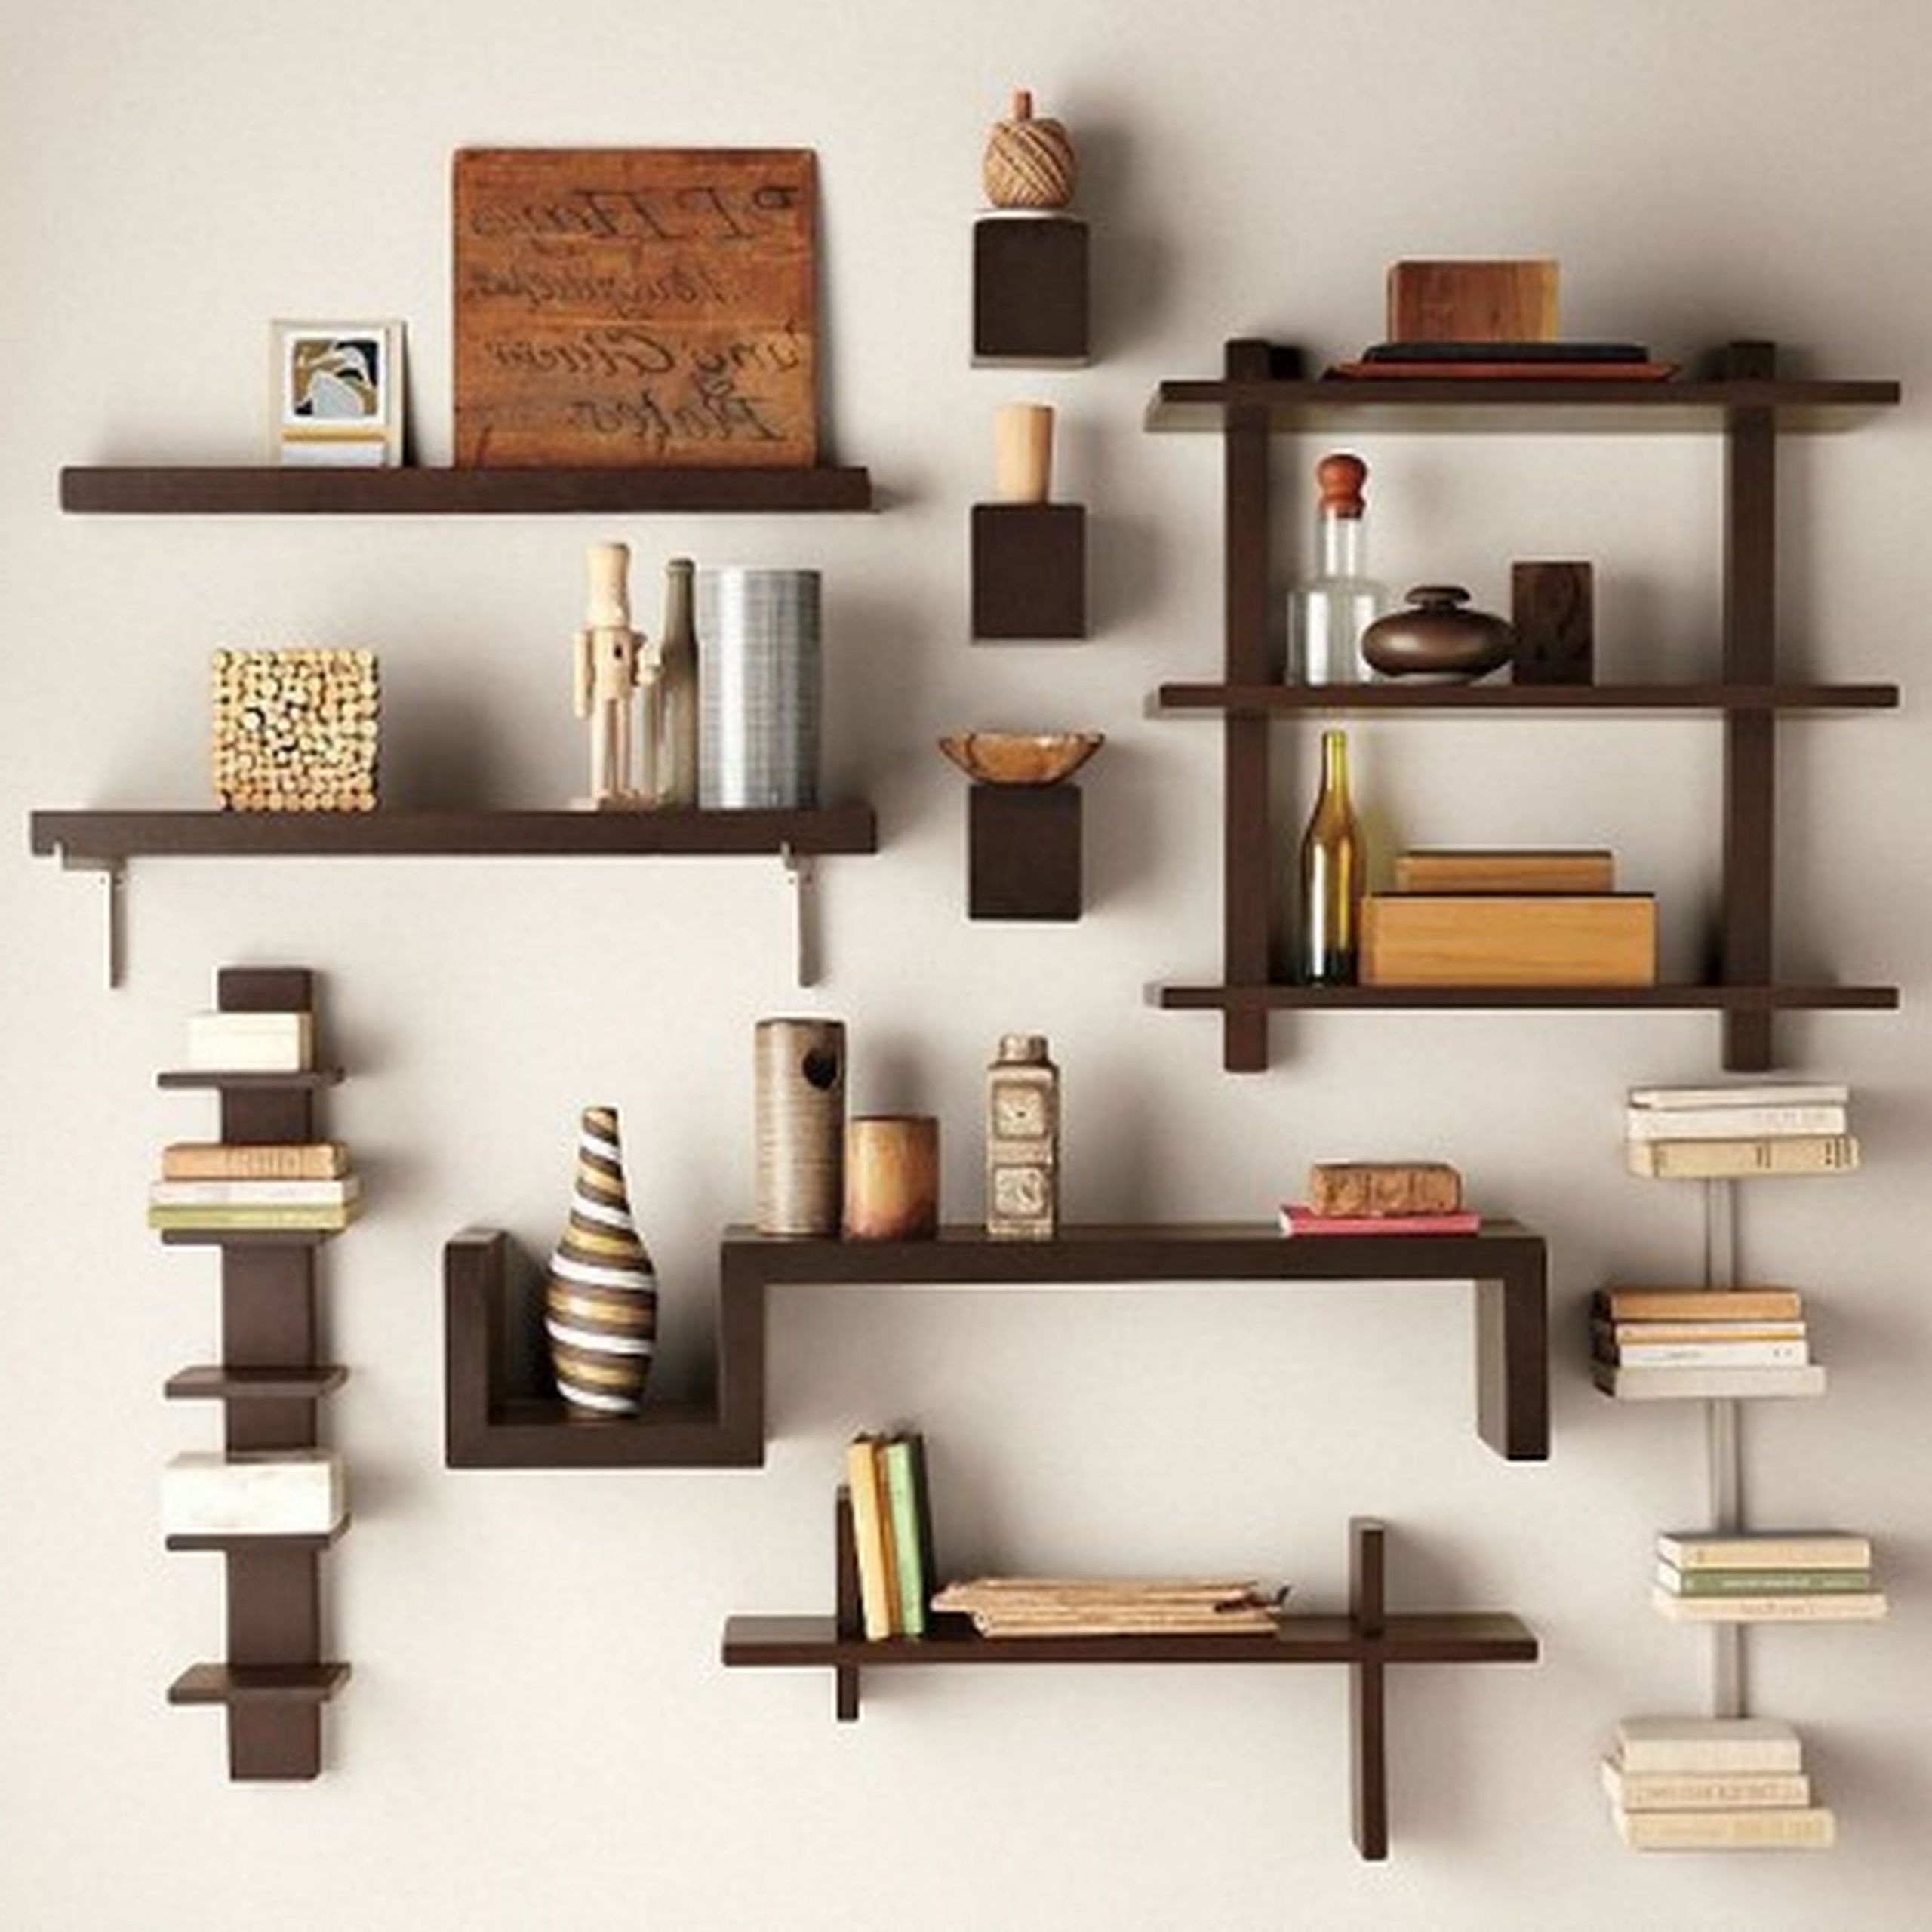 Shelving For Living Room Walls
 Decorate Rooms with Decorative Shelving Unit – HomesFeed